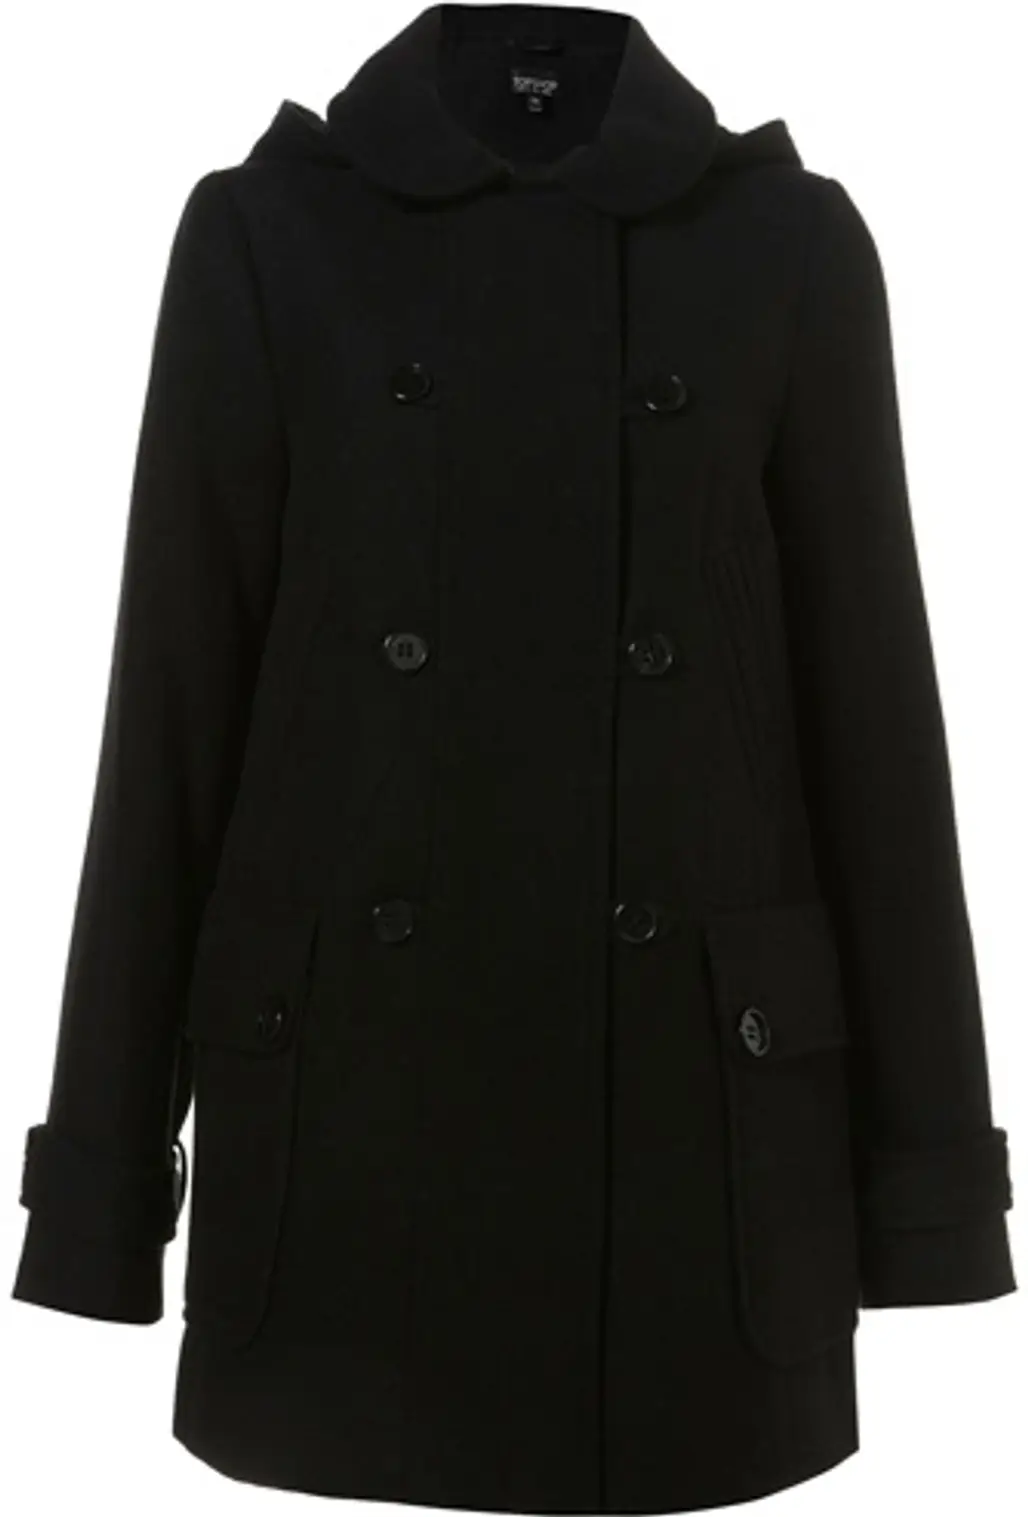 Topshop Black Double Breasted Hooded Coat